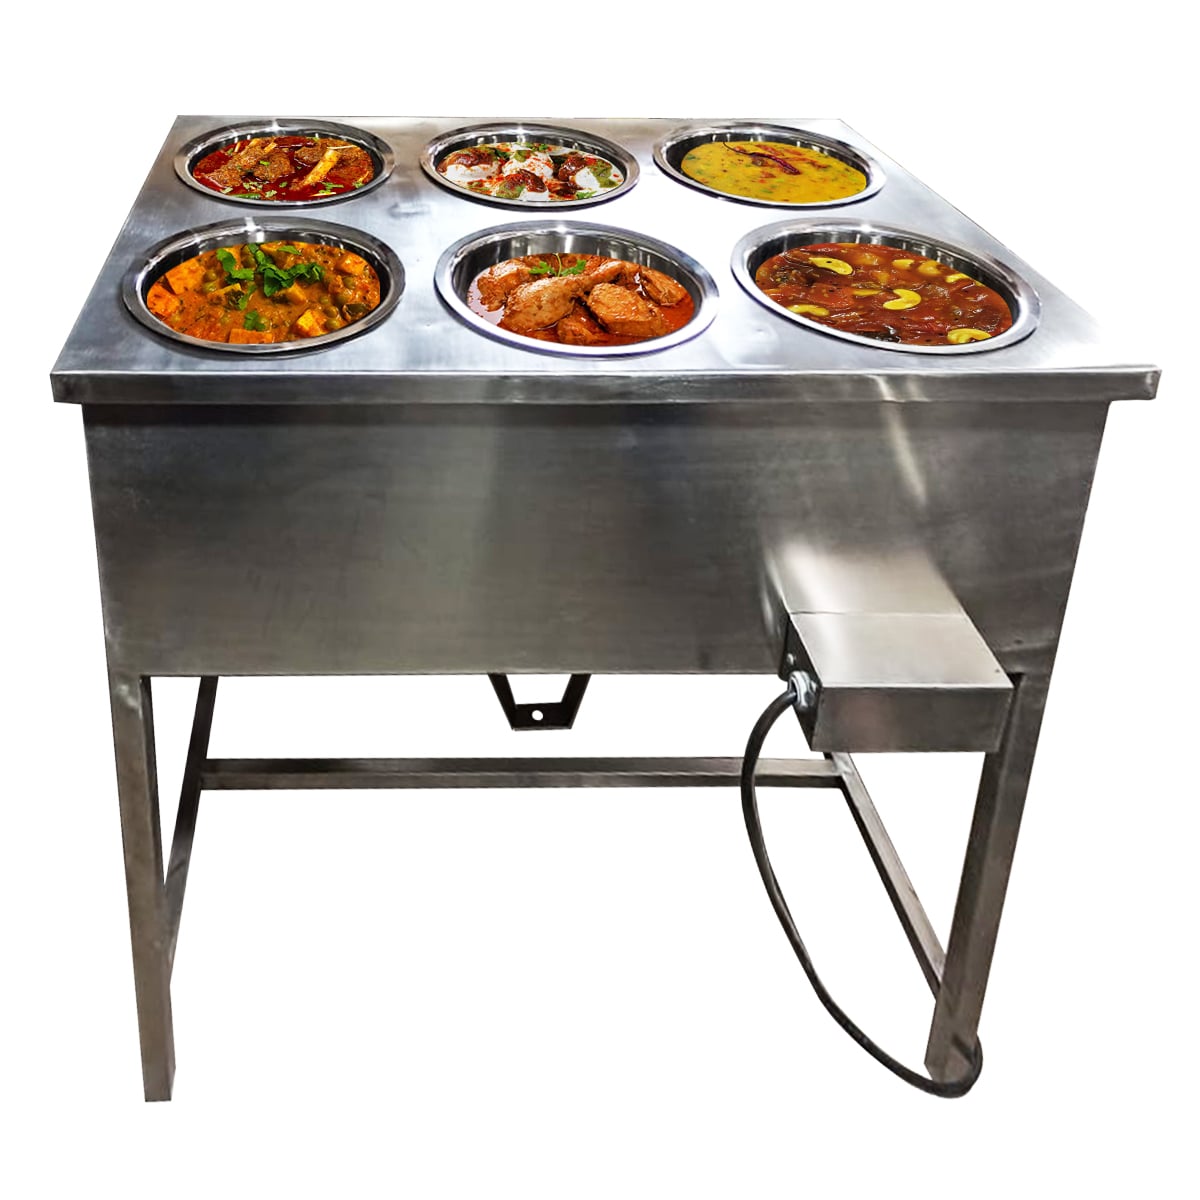 HOT BAIN MARIE ROUND 6 CONTAINER